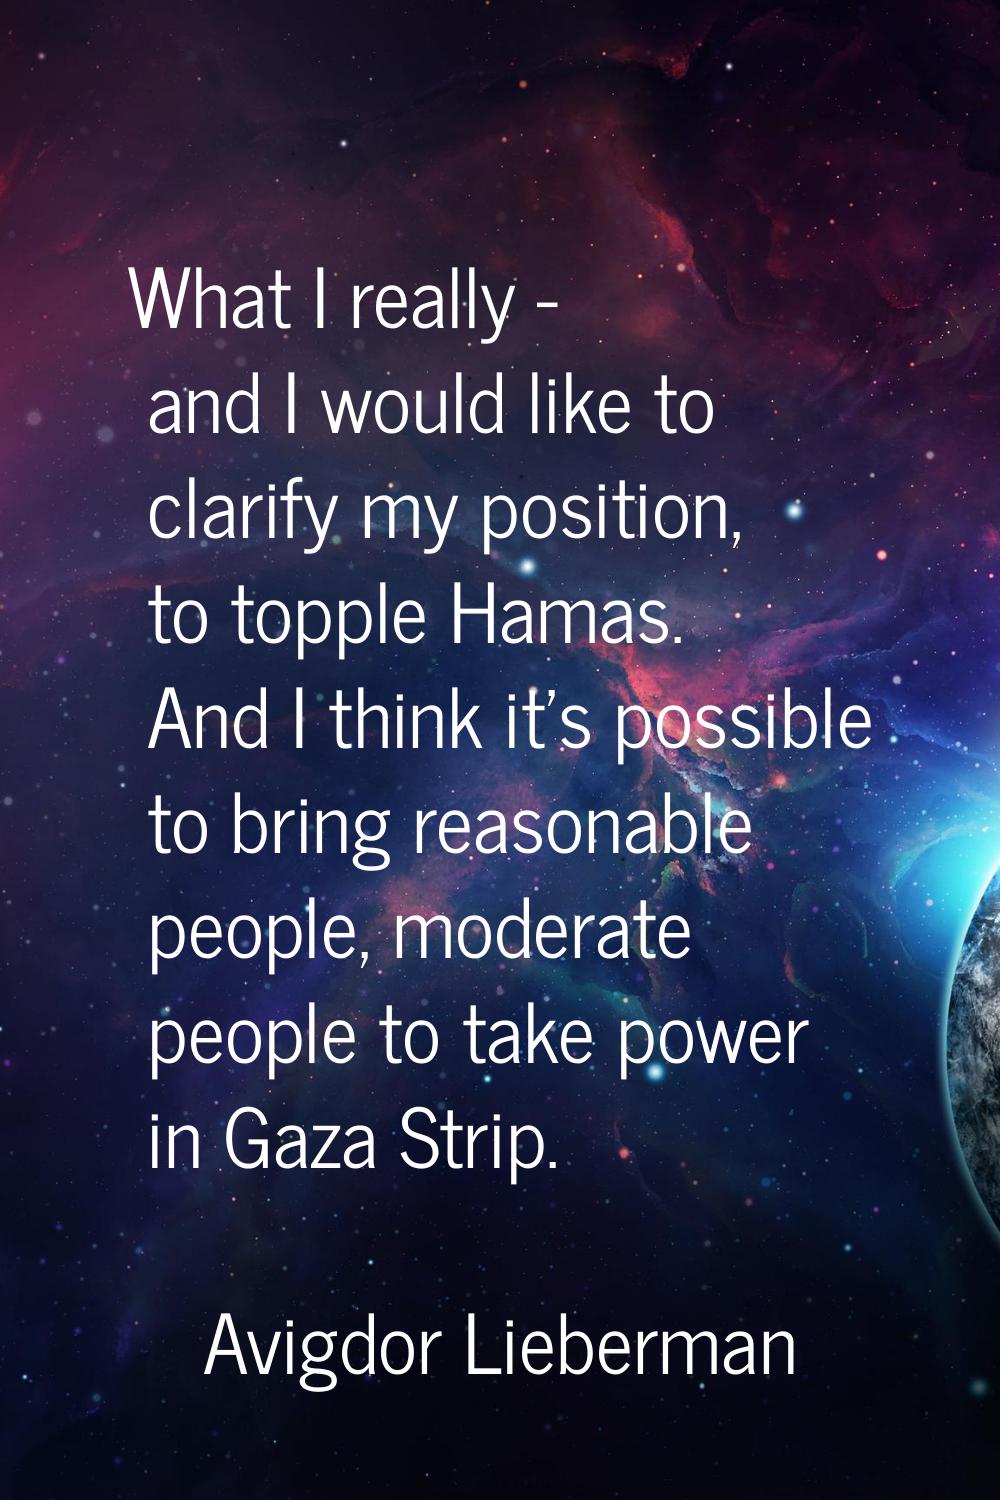 What I really - and I would like to clarify my position, to topple Hamas. And I think it's possible